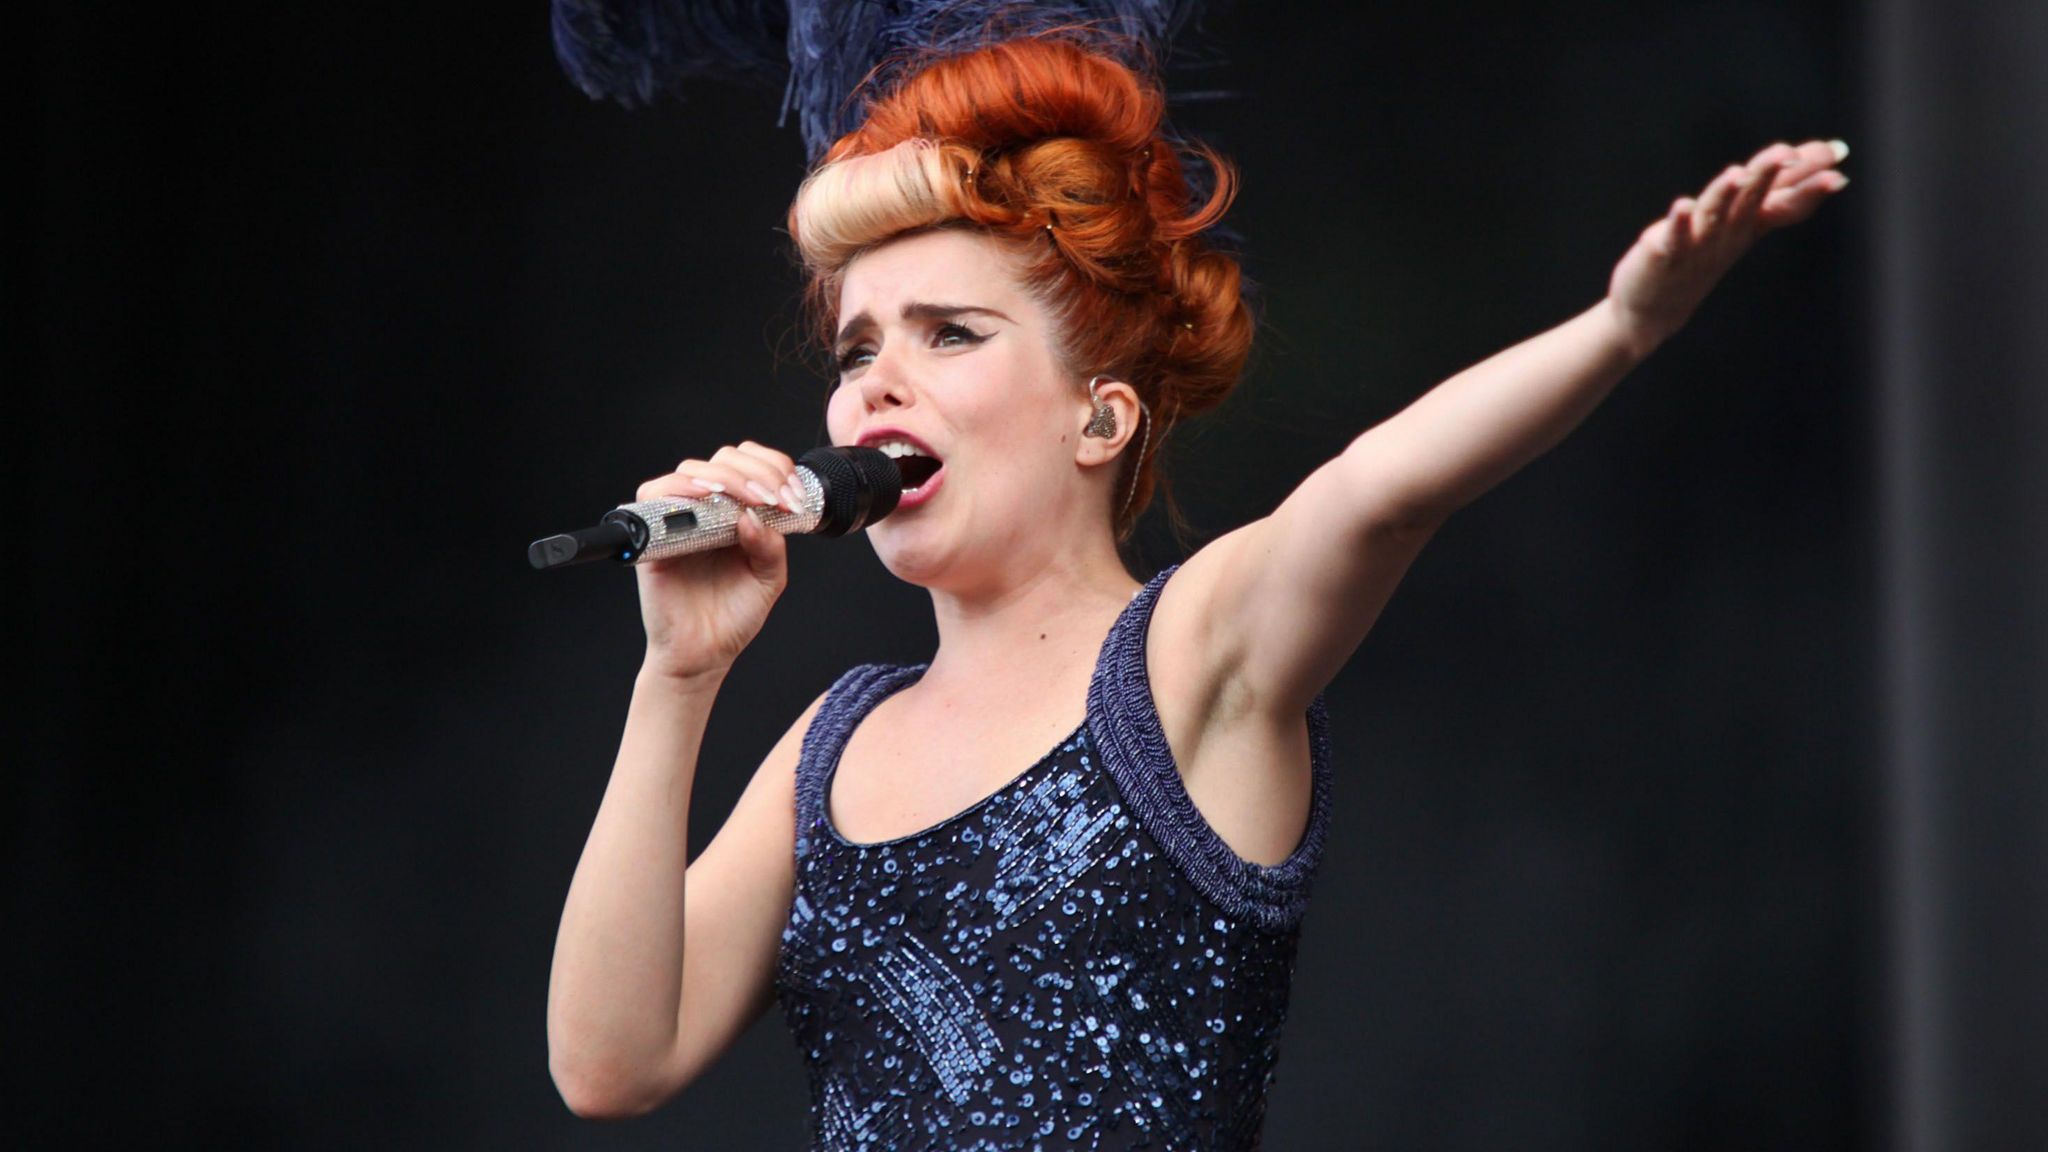 Paloma Faith singing on stage. She wears a sleeveless glittery blue top and has curled hair in shades of red and blonde